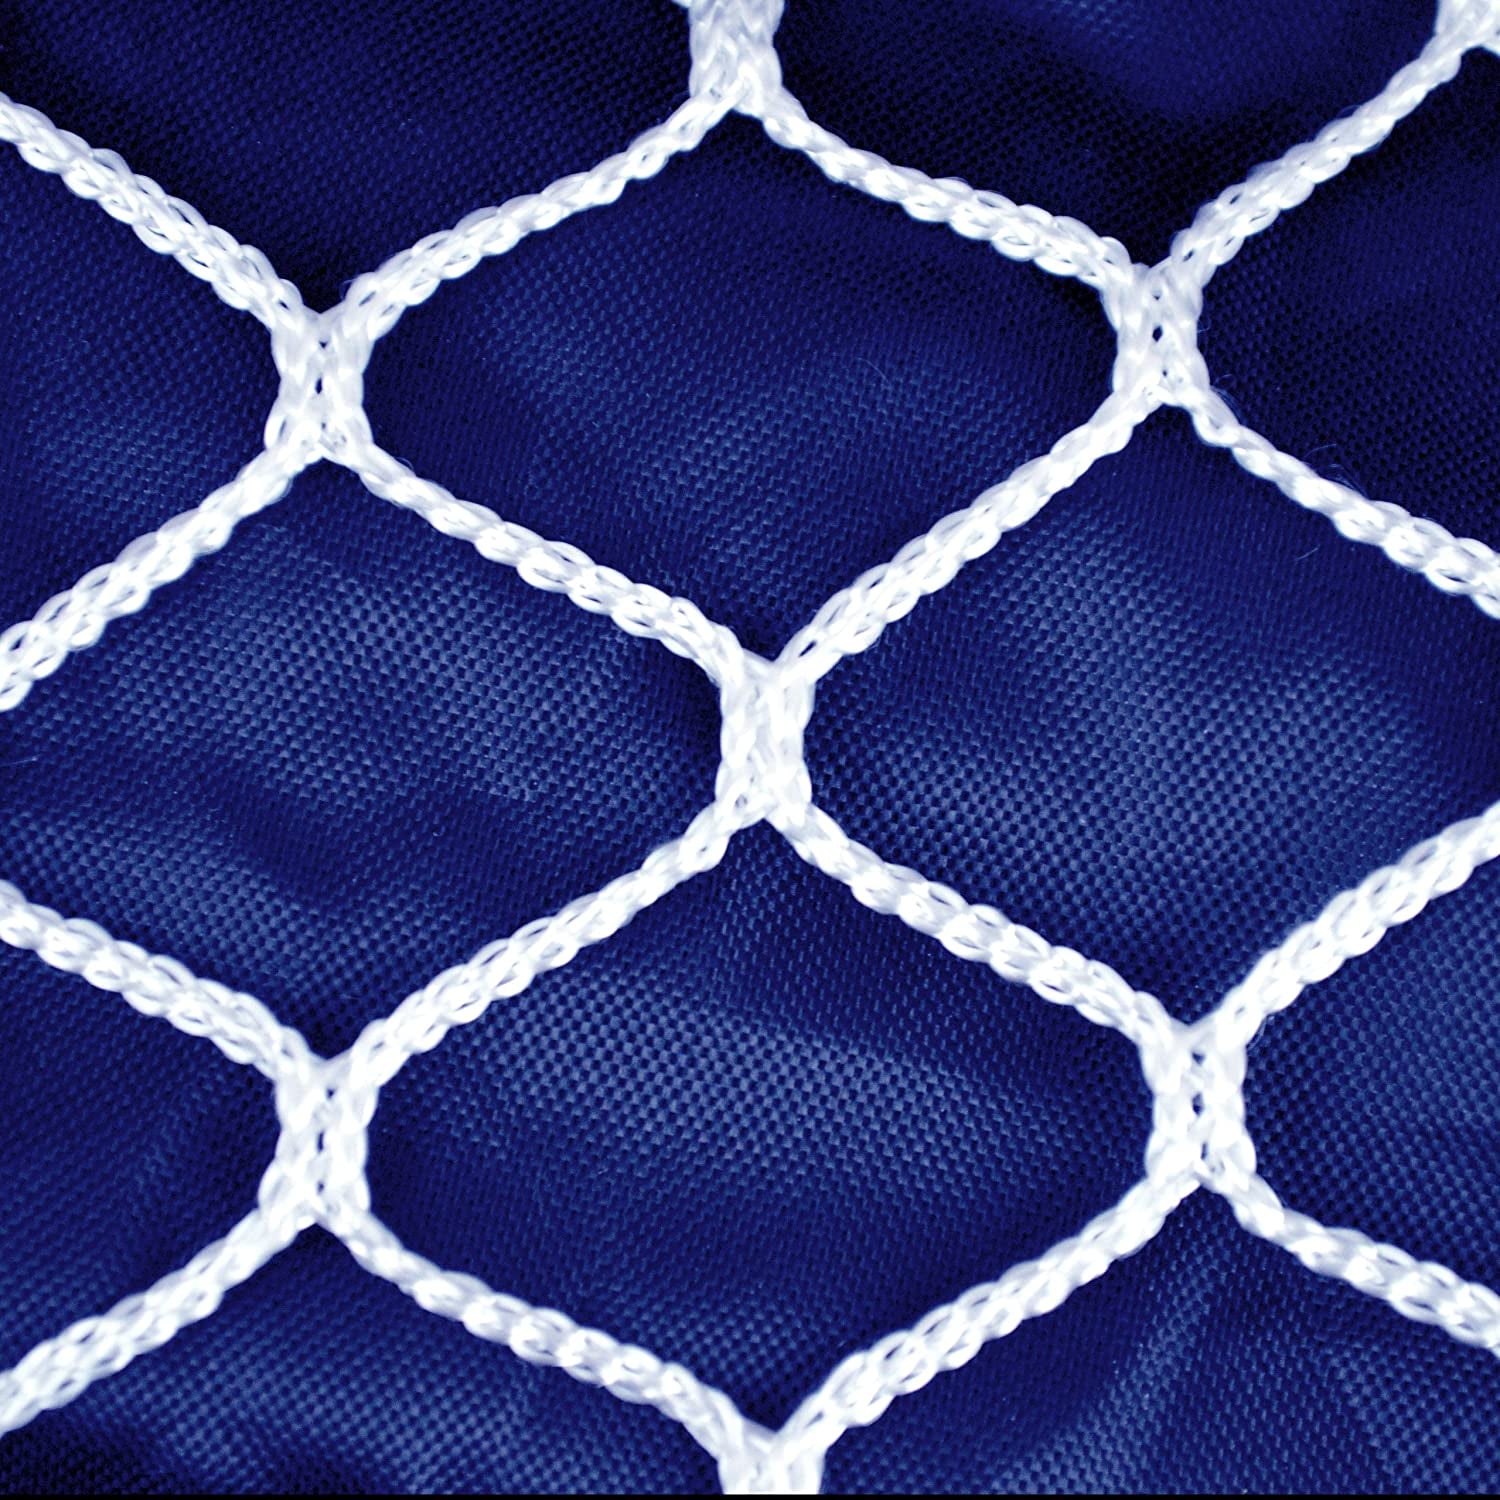 Pro Size Driving Net with Carry Bag - Height 214Cm/7Ft - Width 305Cm/10Ft - Depth 153Cm/5Ft